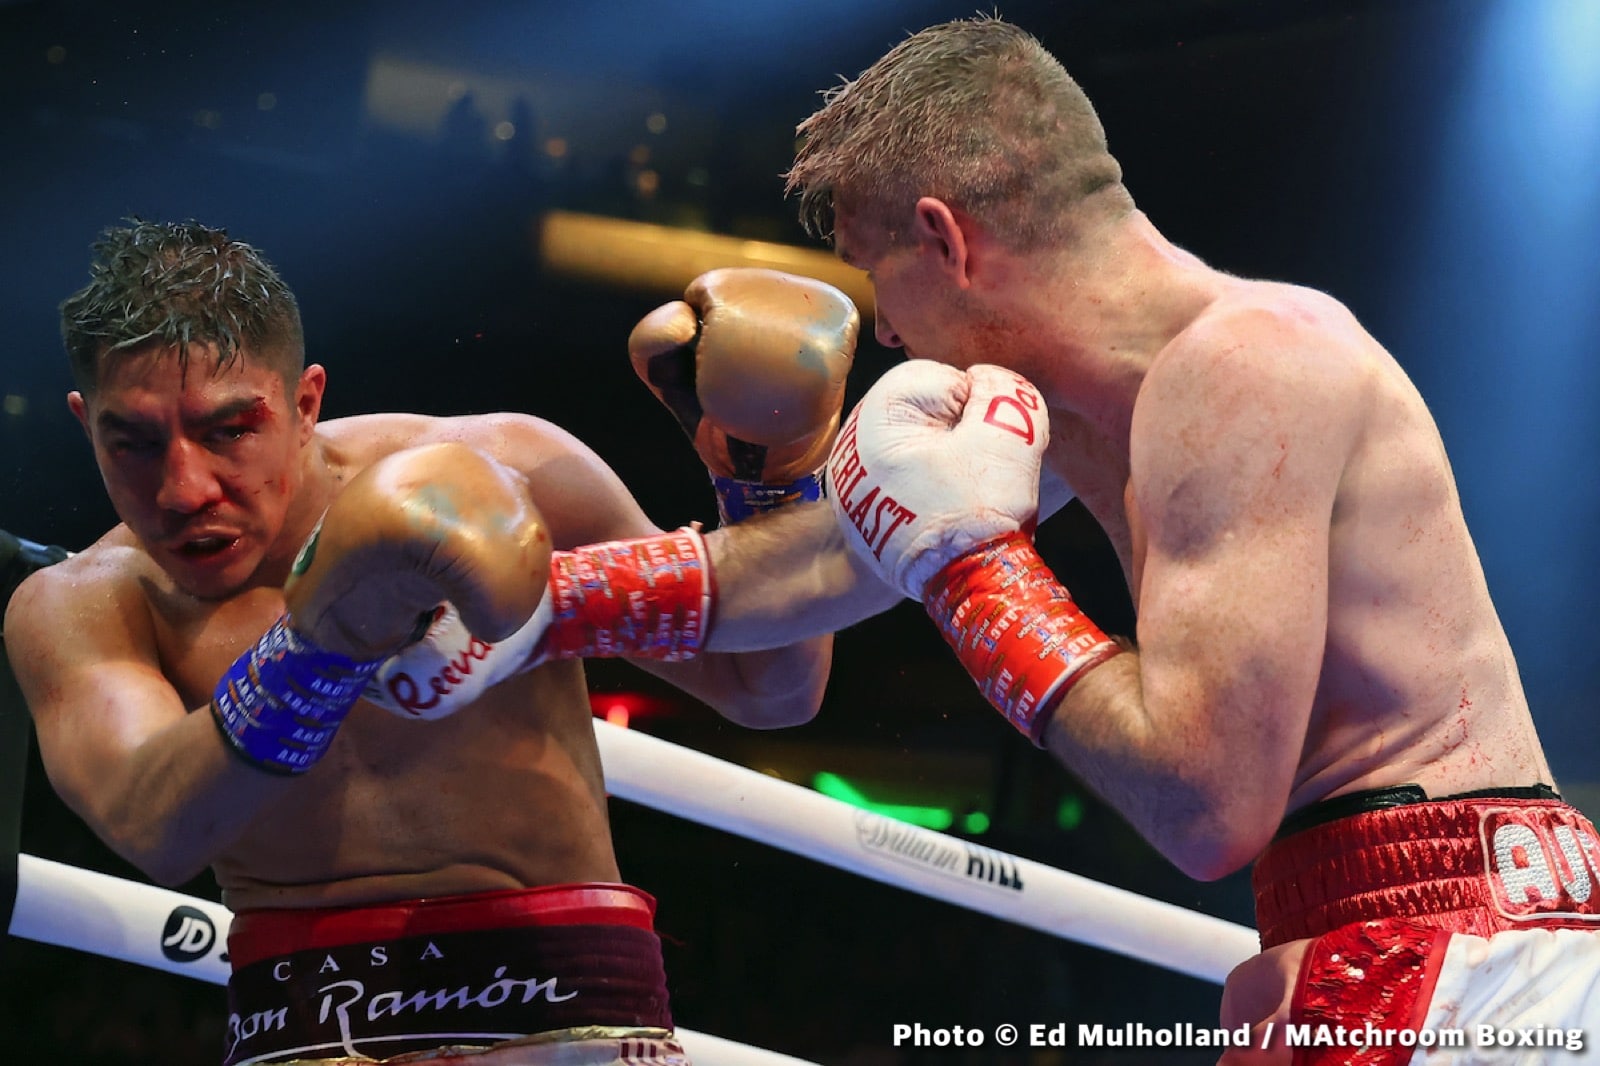 Image: Results / Photos: Taylor Outpoints Serrano, Beefy Smith stops Vargas